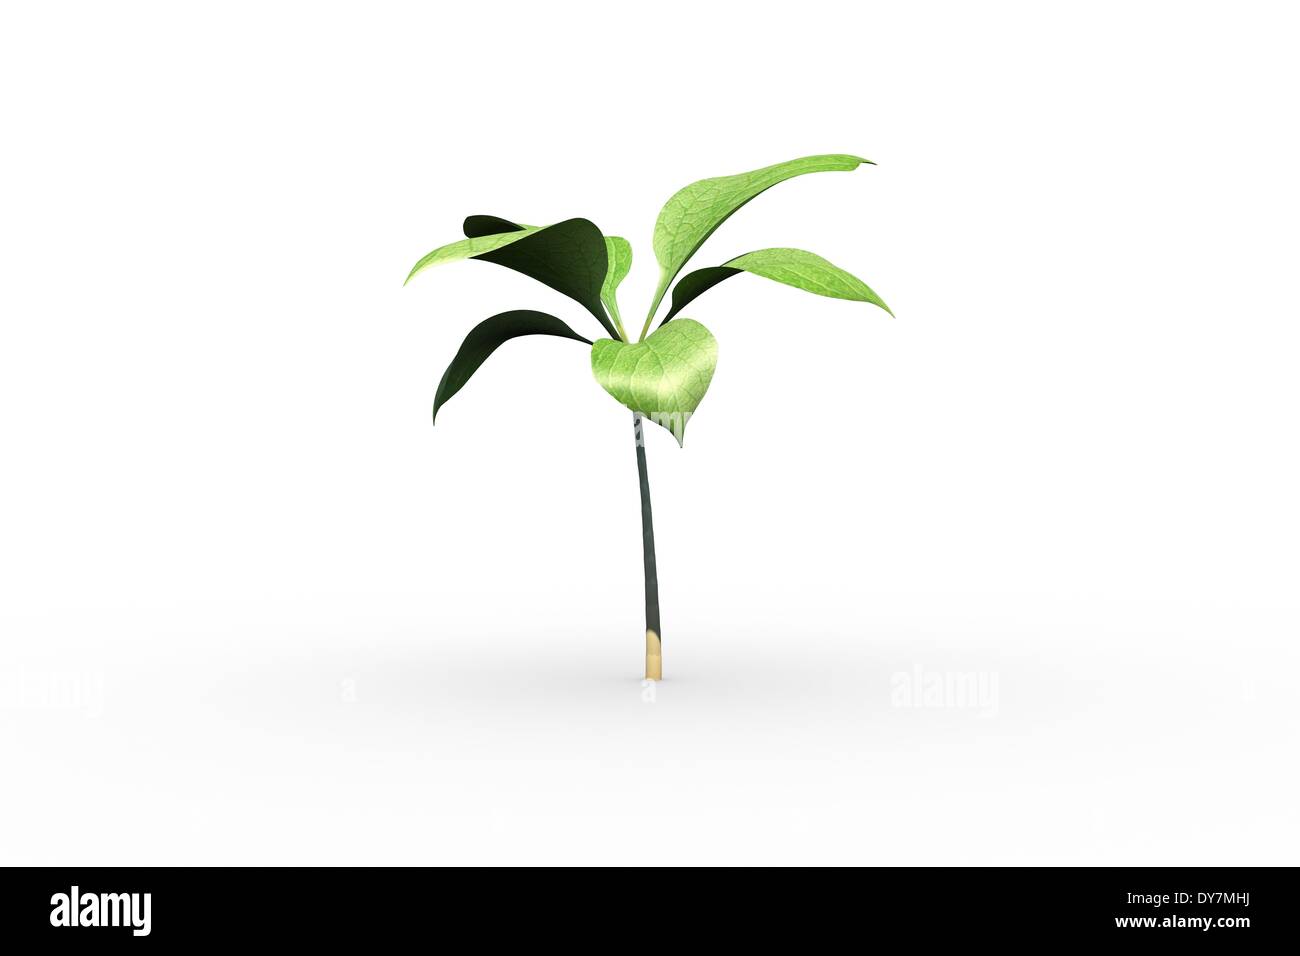 Little green seedling with leaves growing Stock Photo